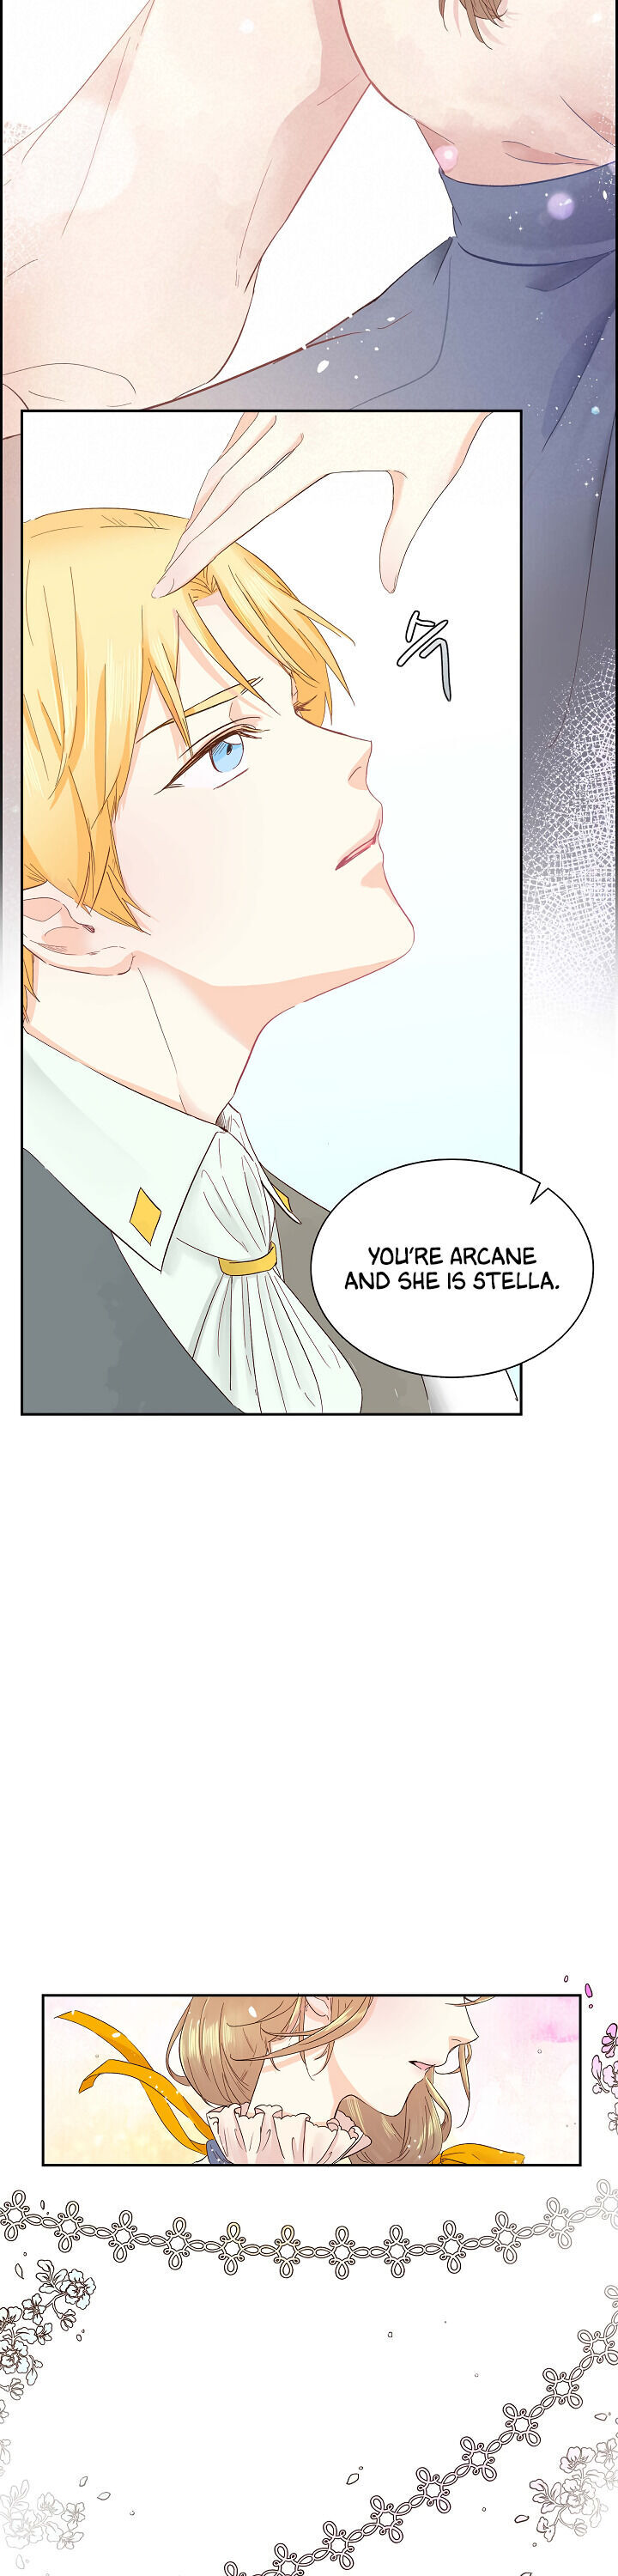 For Stella chapter 1